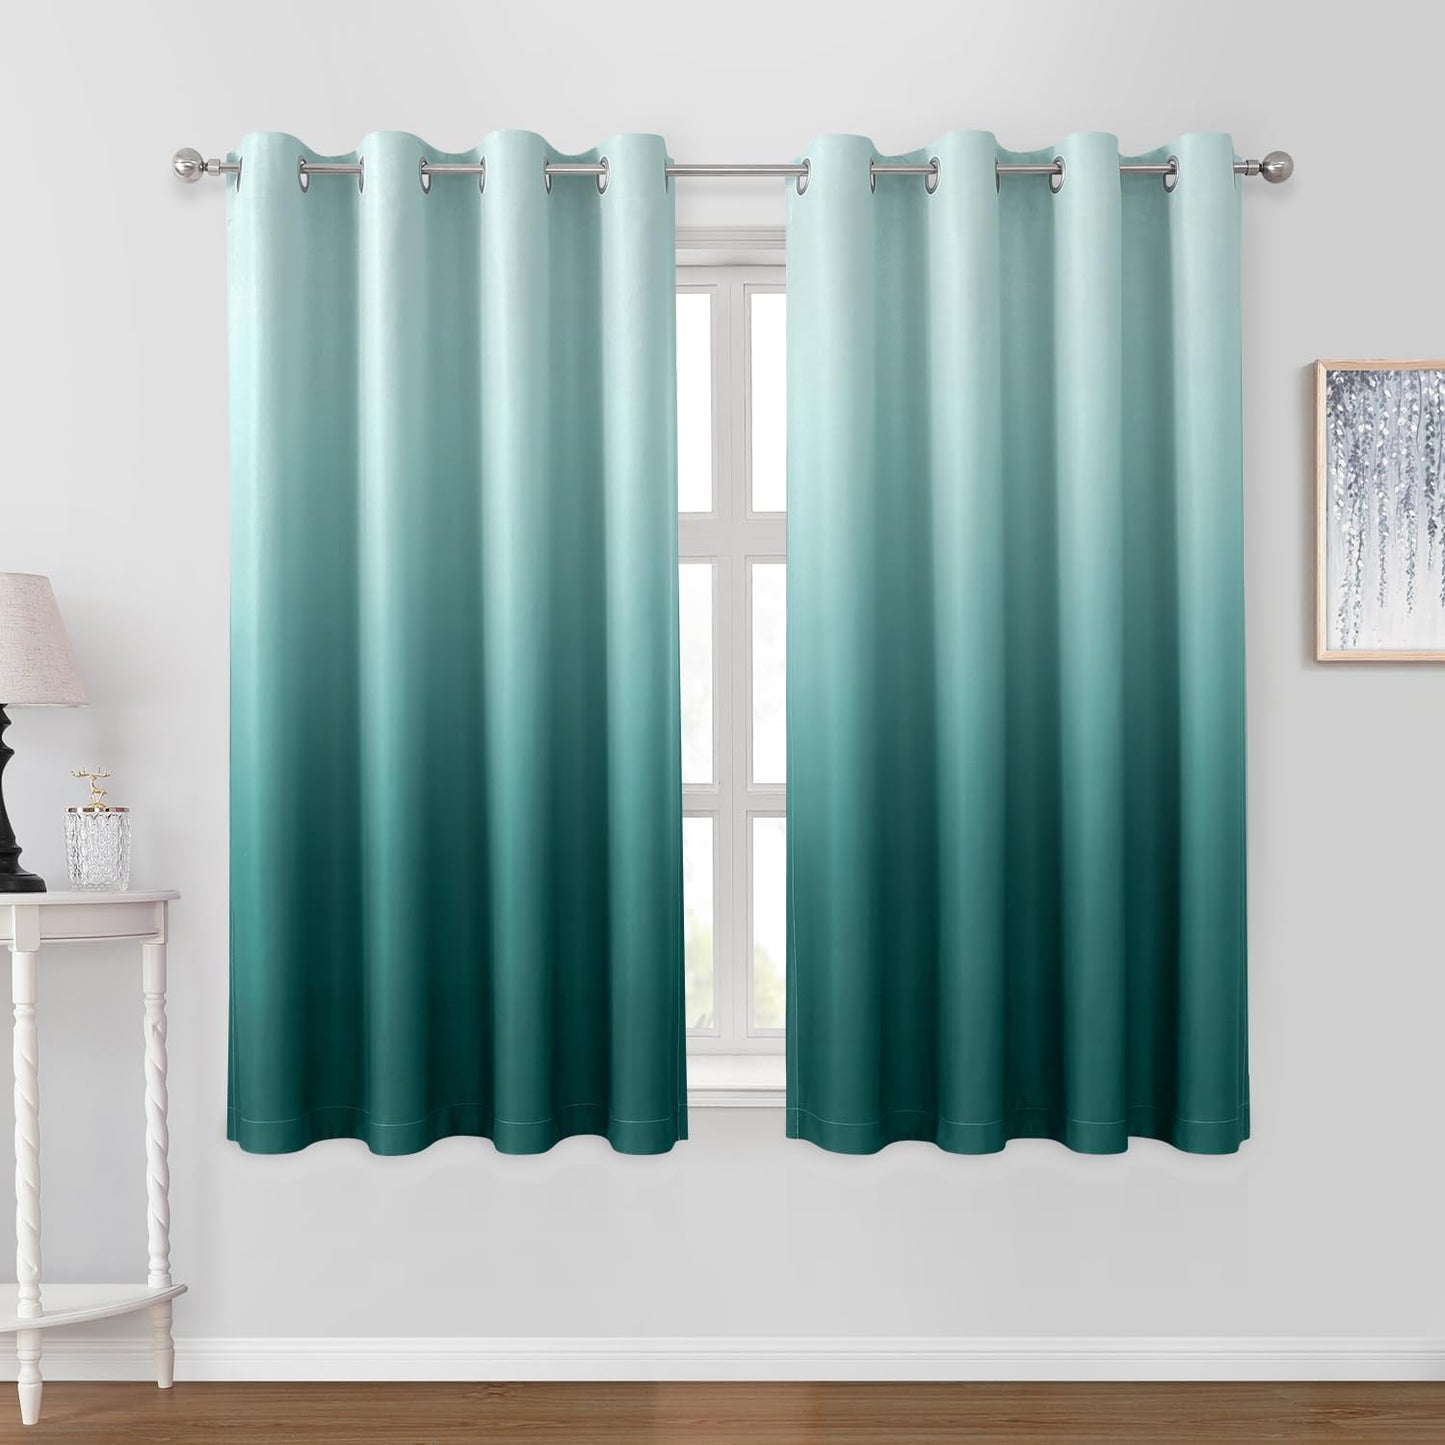 HOMEIDEAS Navy Blue Ombre Blackout Curtains 52 X 84 Inch Length Gradient Room Darkening Thermal Insulated Energy Saving Grommet 2 Panels Window Drapes for Living Room/Bedroom  HOMEIDEAS Teal 52"W X 63"L 